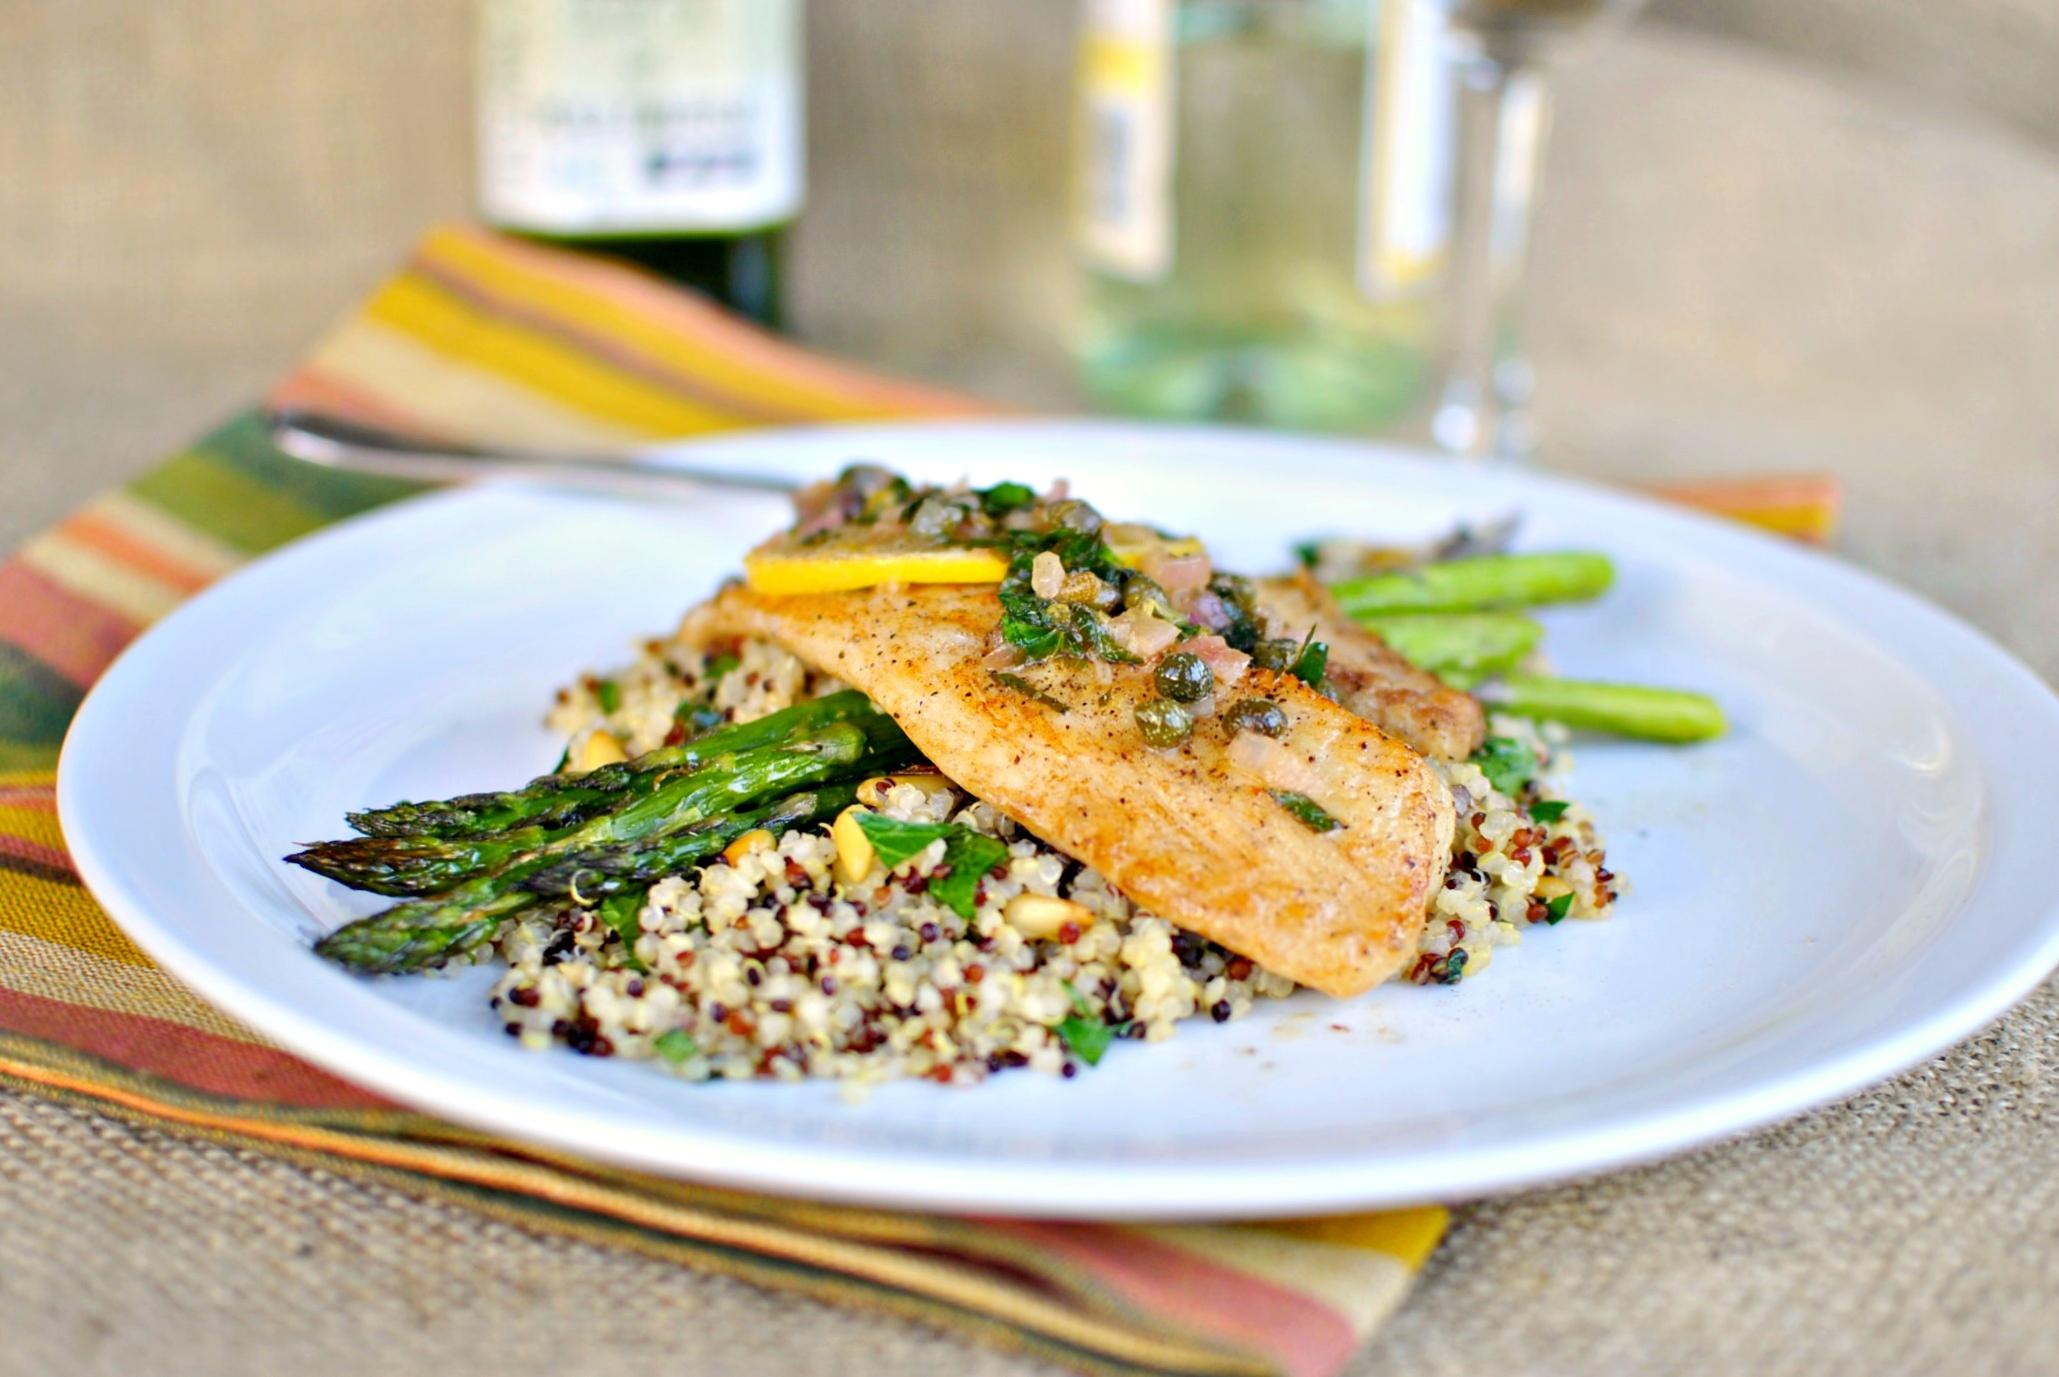  Tilapia fillets bathed in a tangy, flavorful sauce that's perfect for seafood lovers